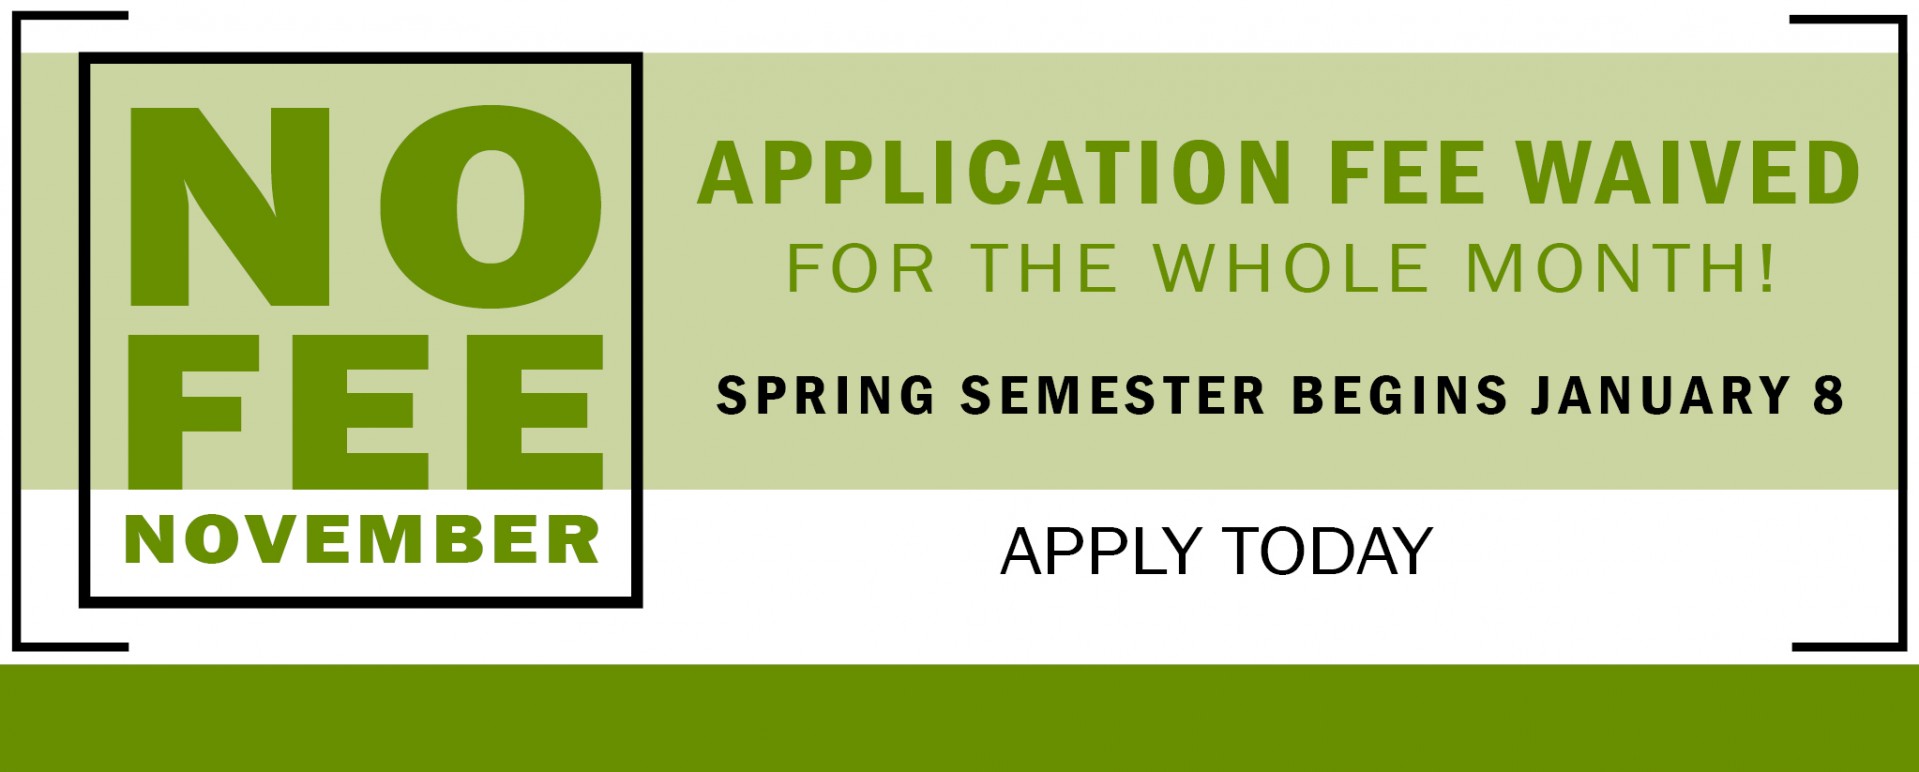 Click here to apply today!